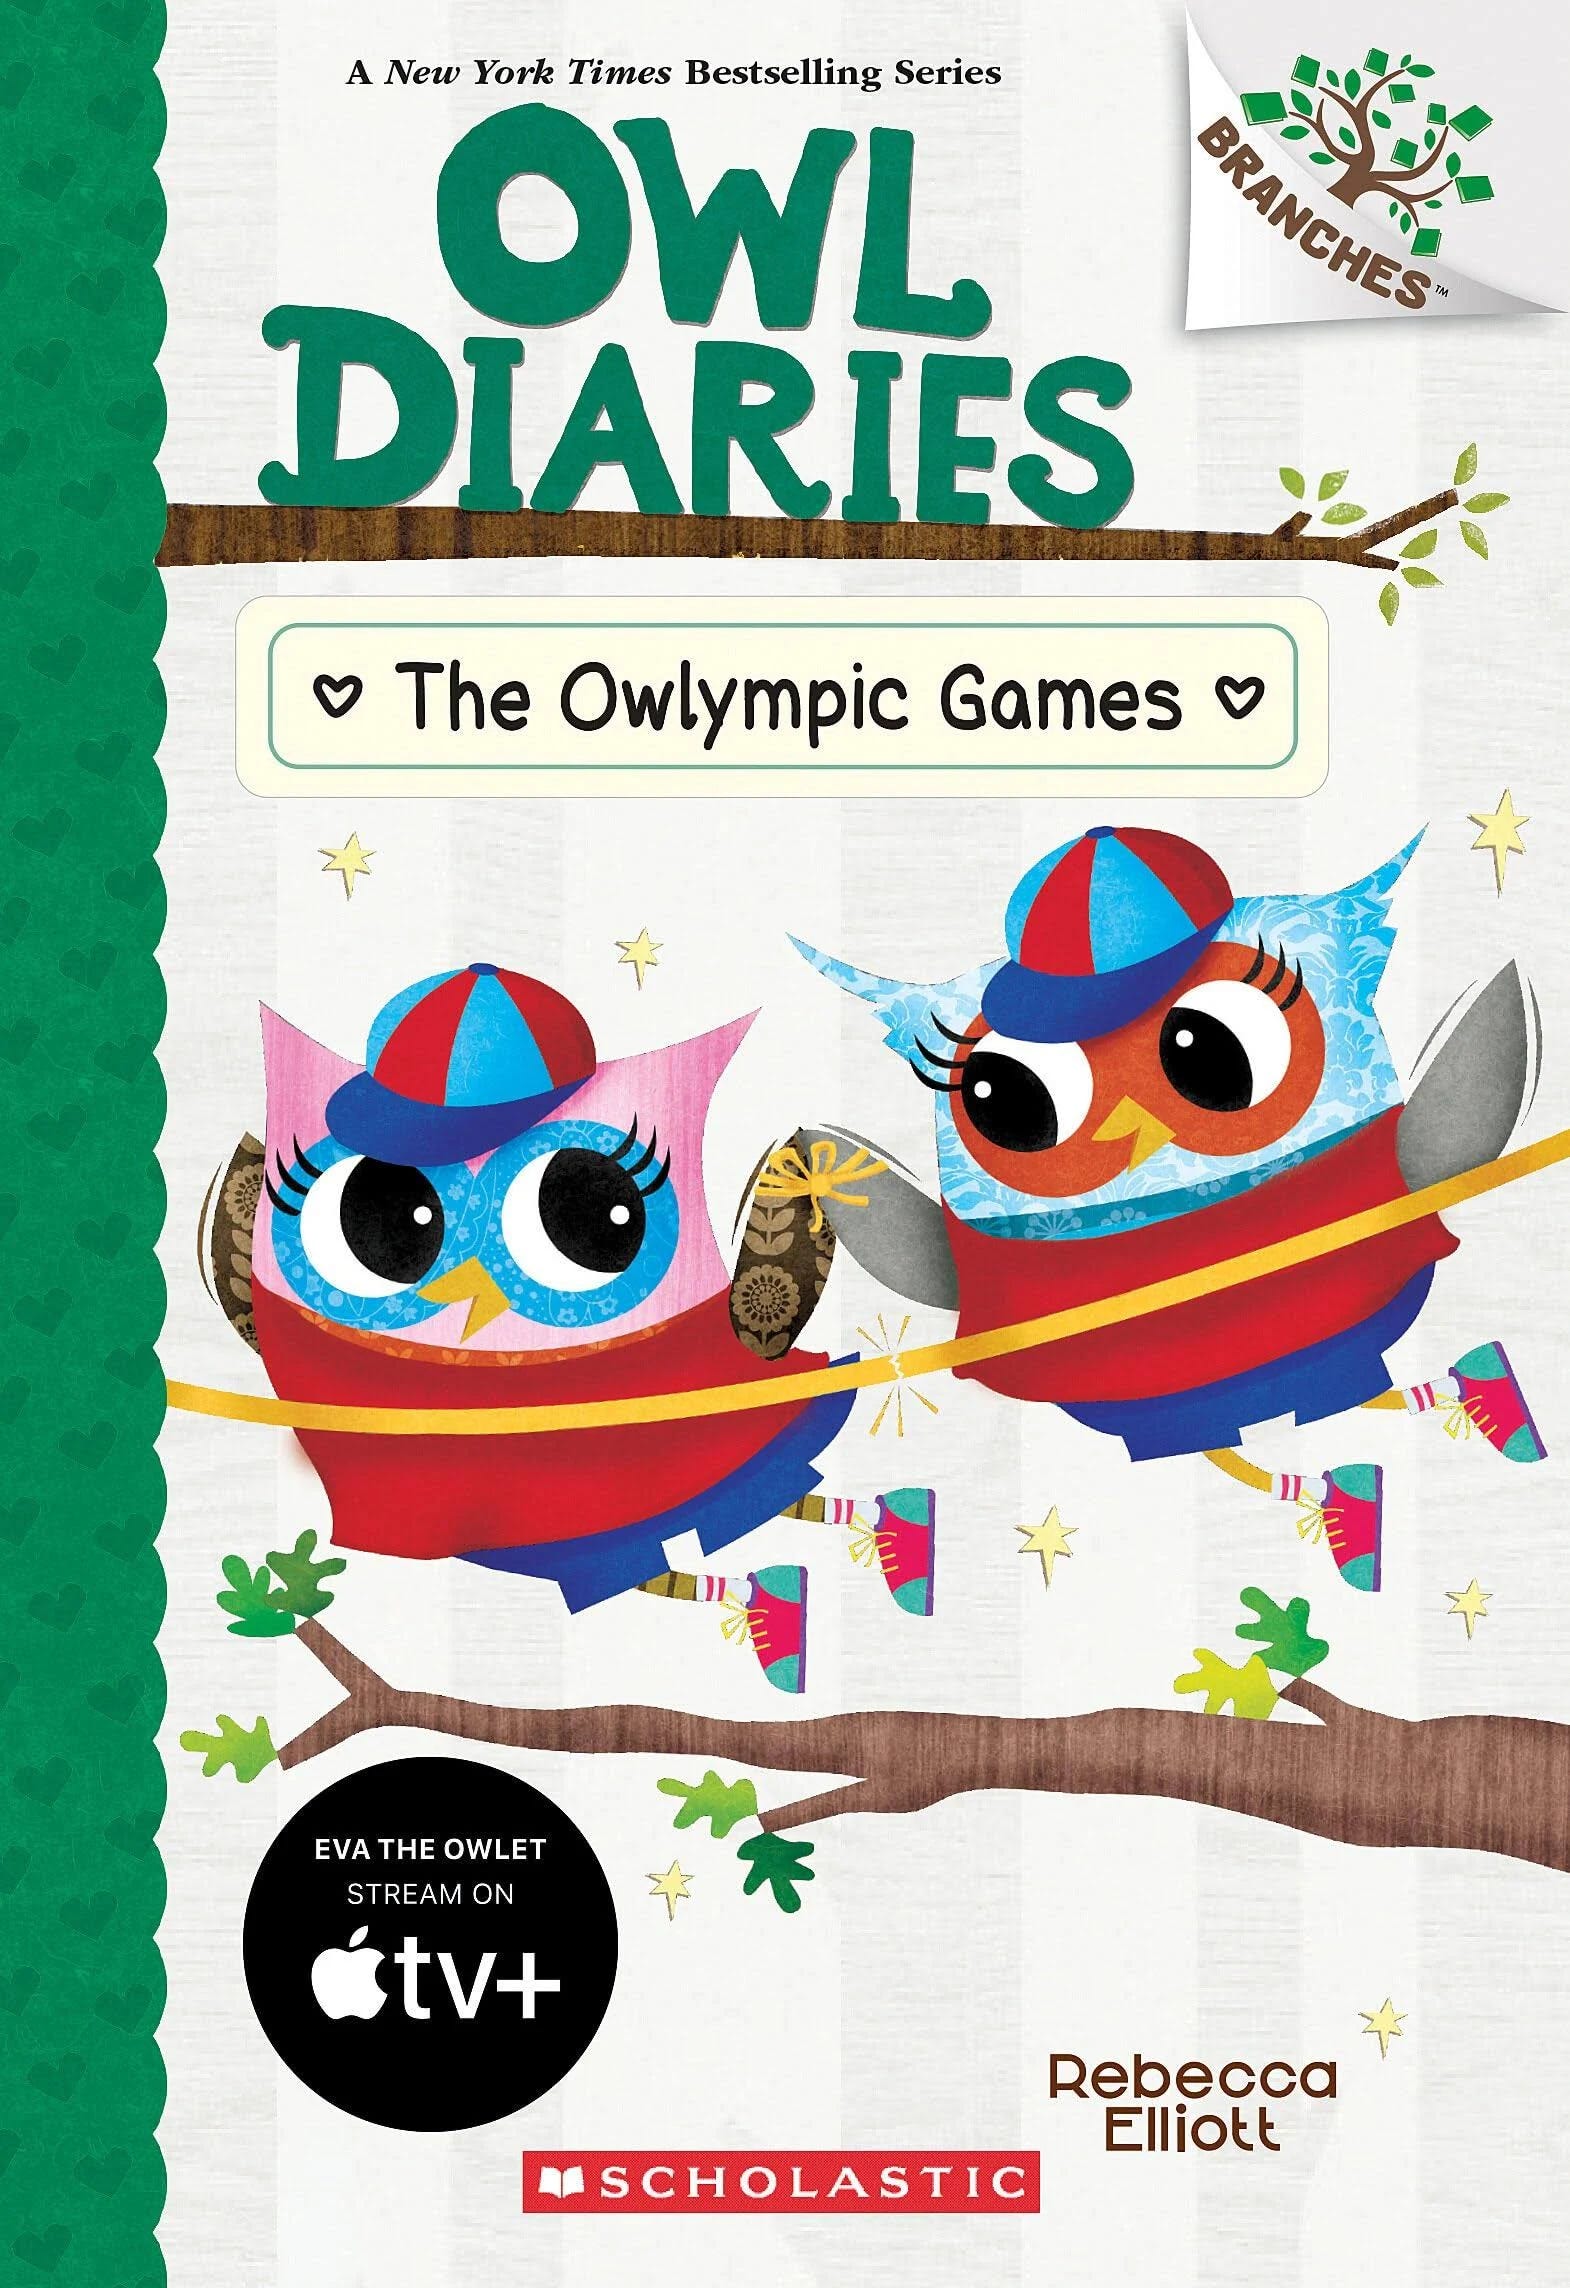 The Owlympic Games: Exciting Adventure in the Owl Diaries #20 | Image